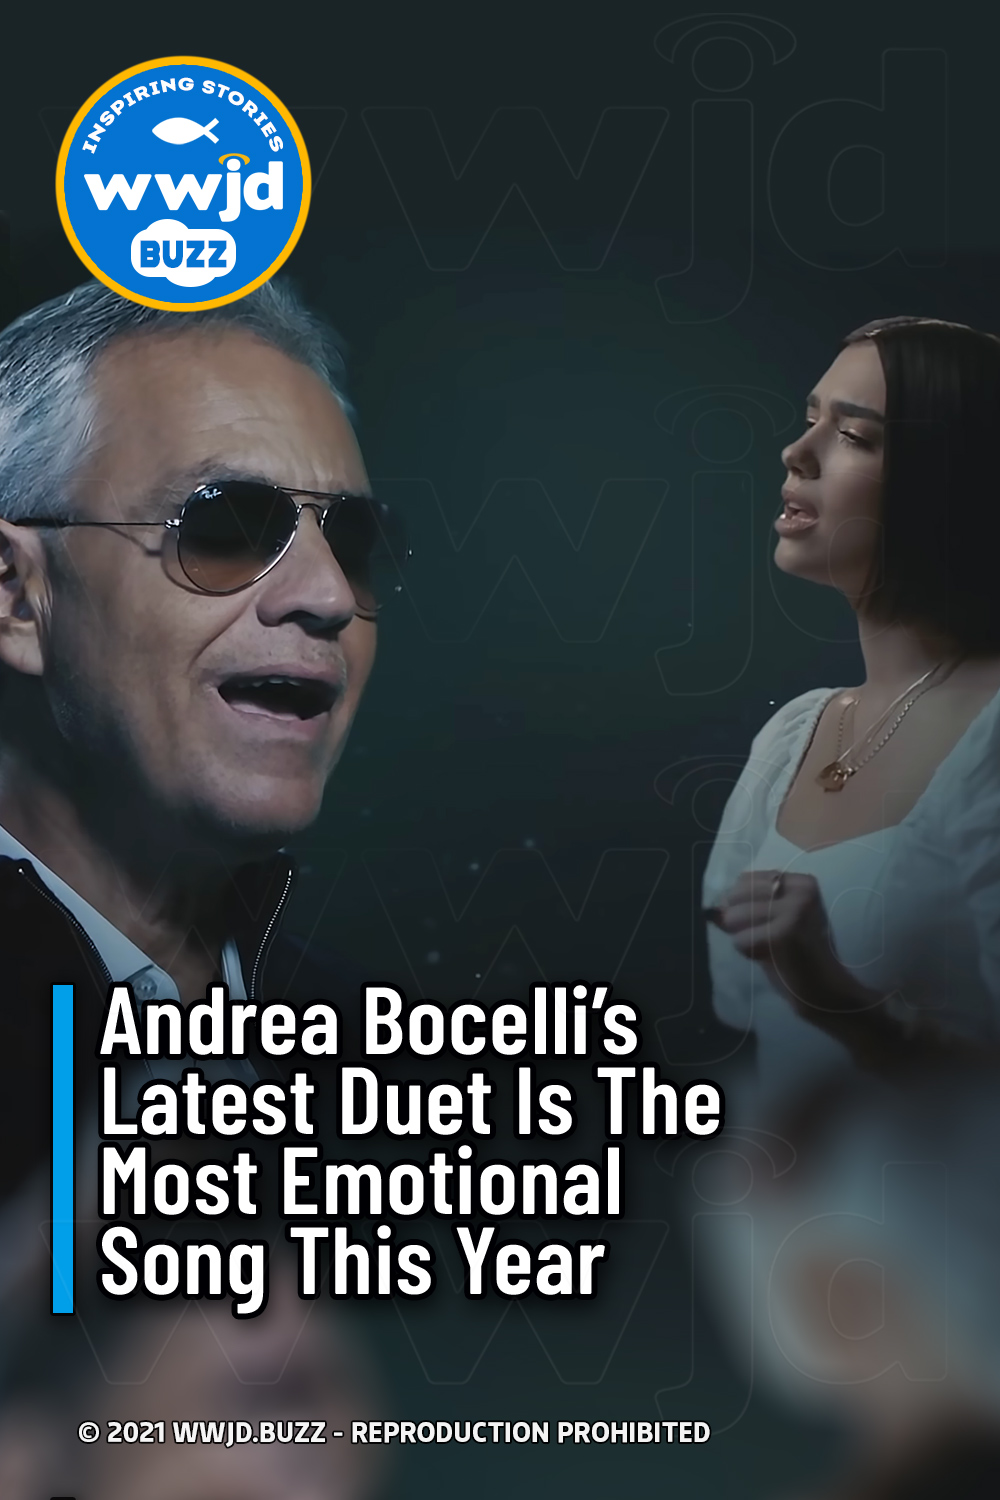 Andrea Bocelli’s Latest Duet Is The Most Emotional Song This Year - WWJD